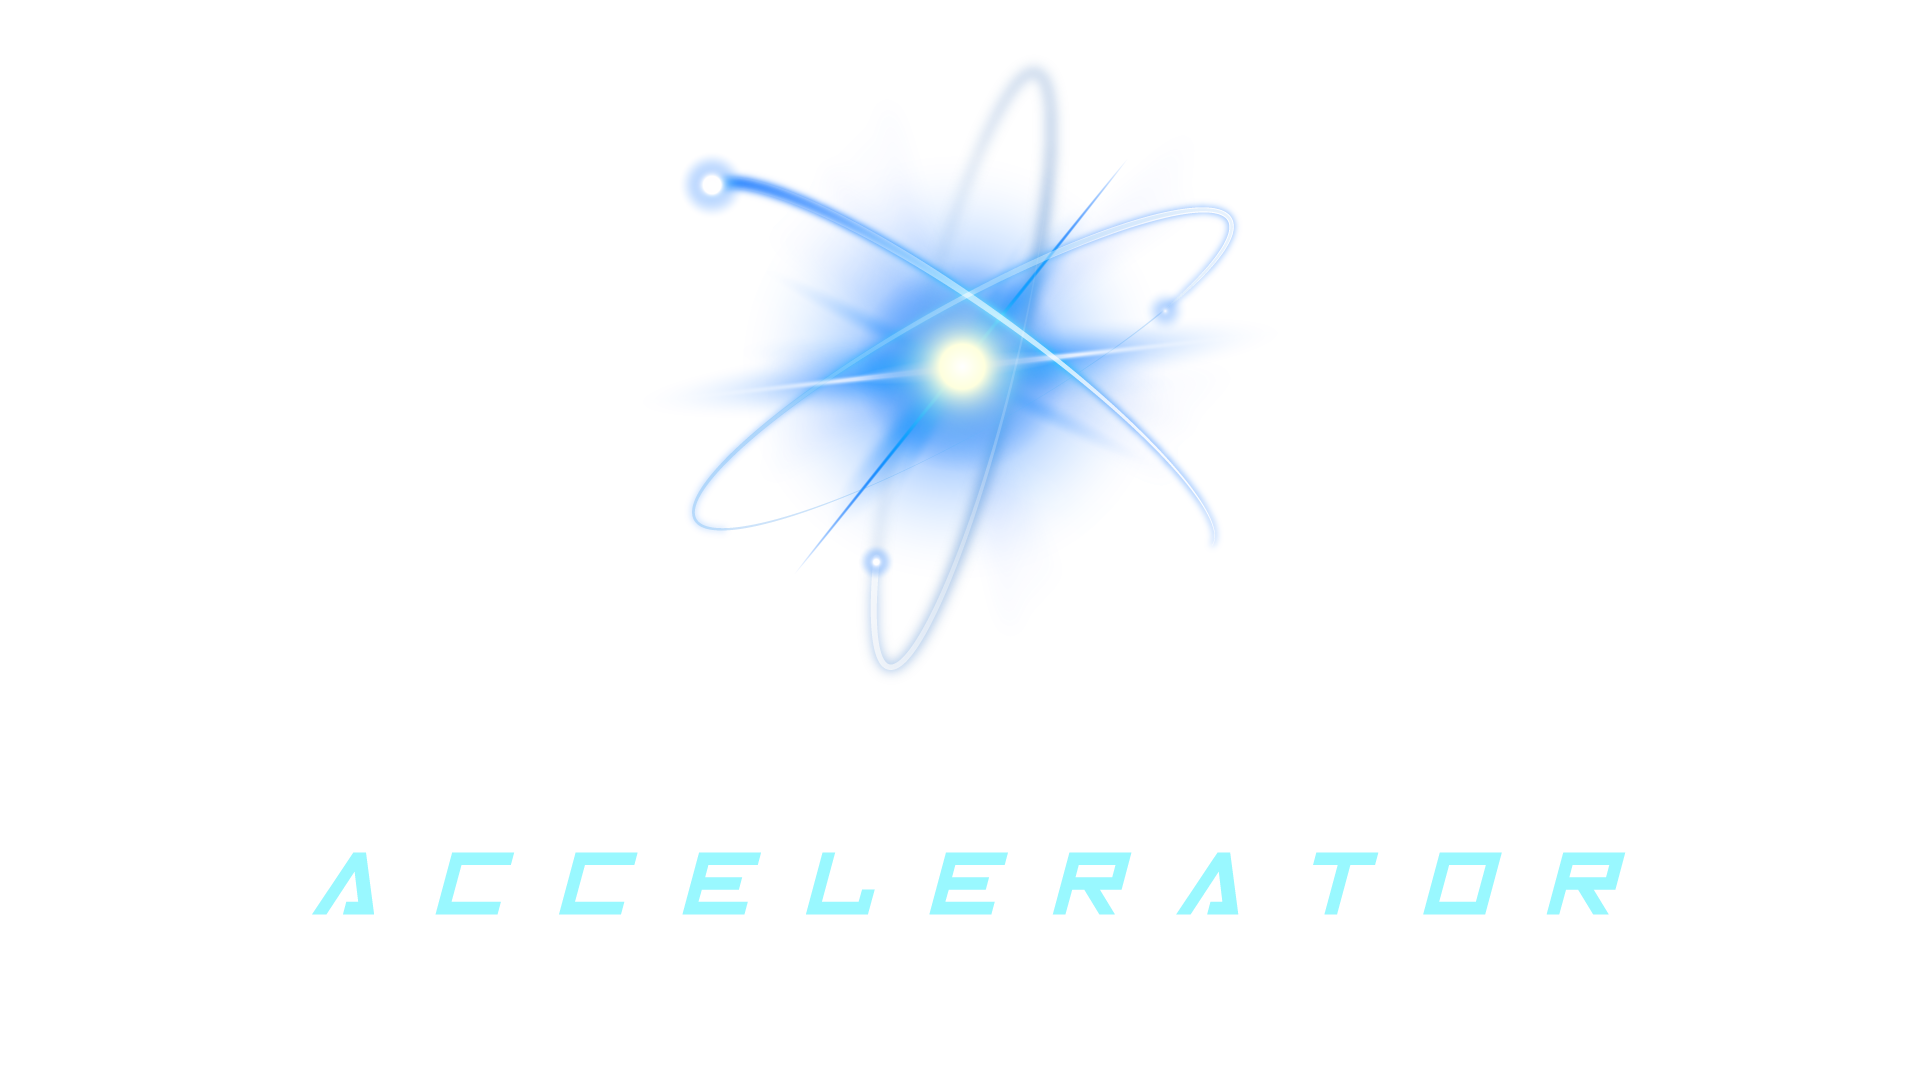 Buy Axion from the Accelerator